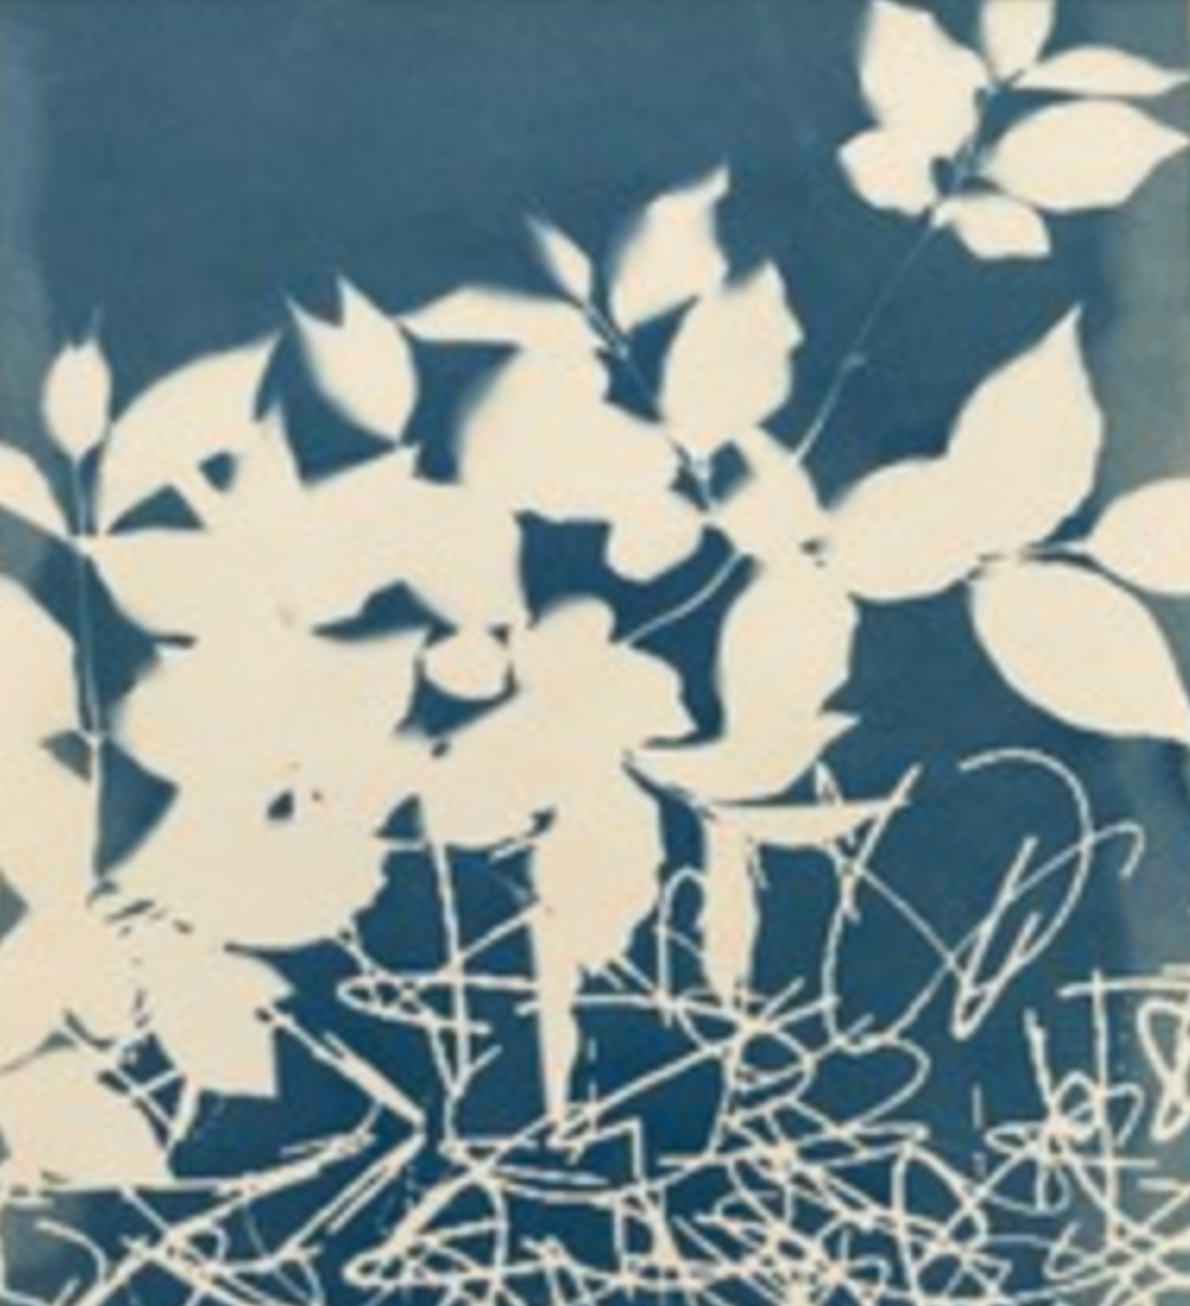 Cyanotype Workshop "Printing with the Sun” / Saturday, July 27th